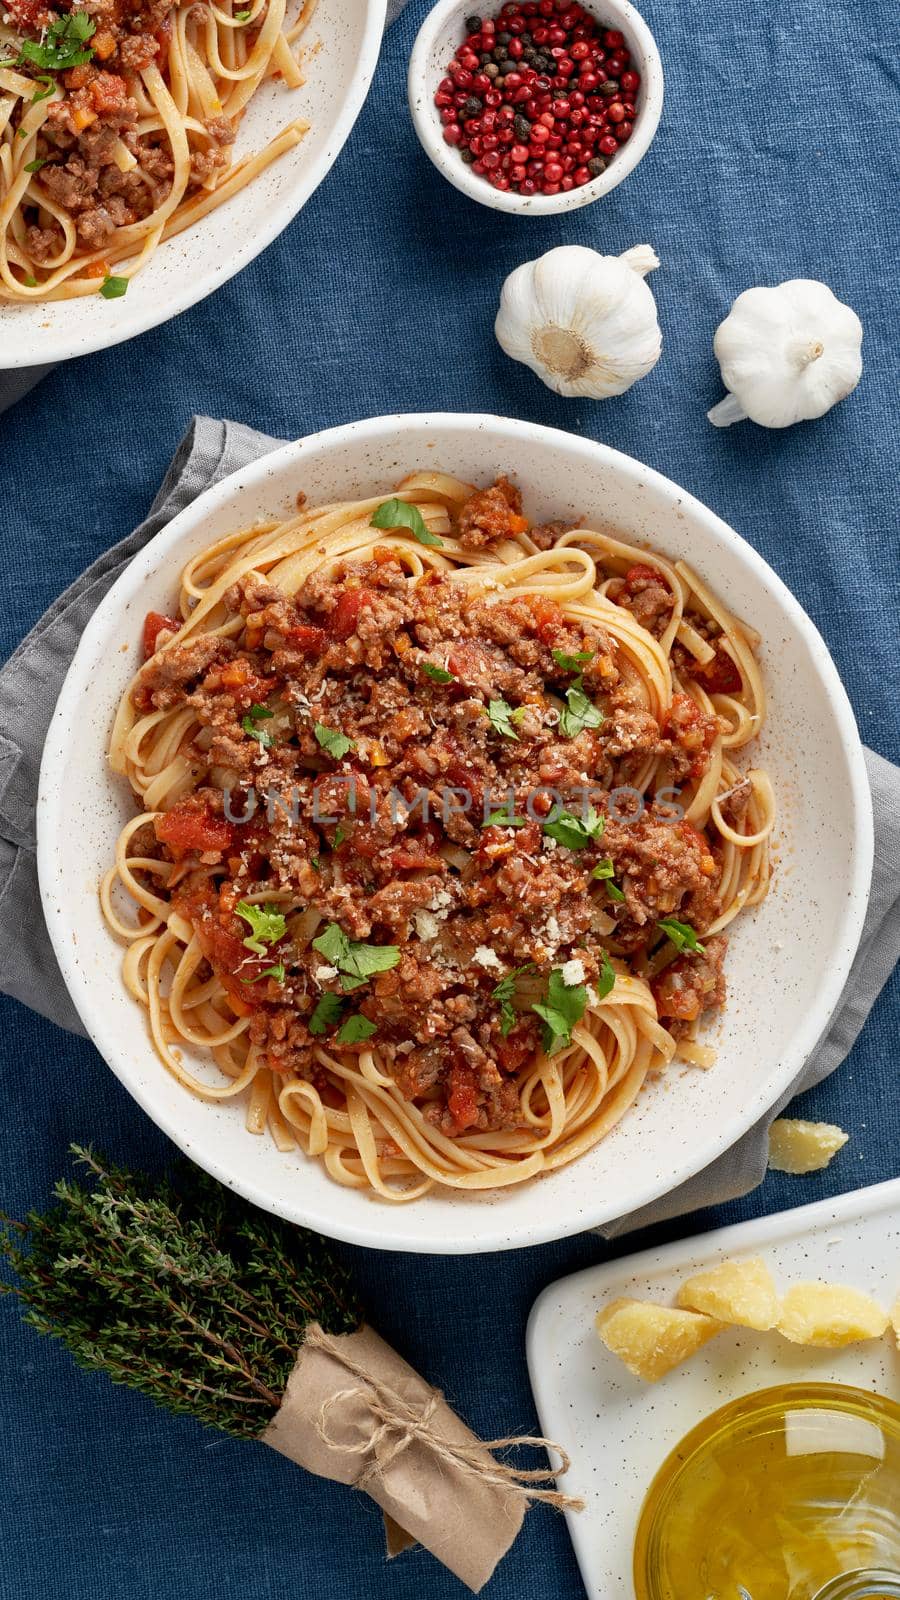 Pasta Bolognese Fettuccine with mincemeat and tomatoes, parmesan cheese. Italian dinner for two, dark blue tablecloth. Top view, vertical